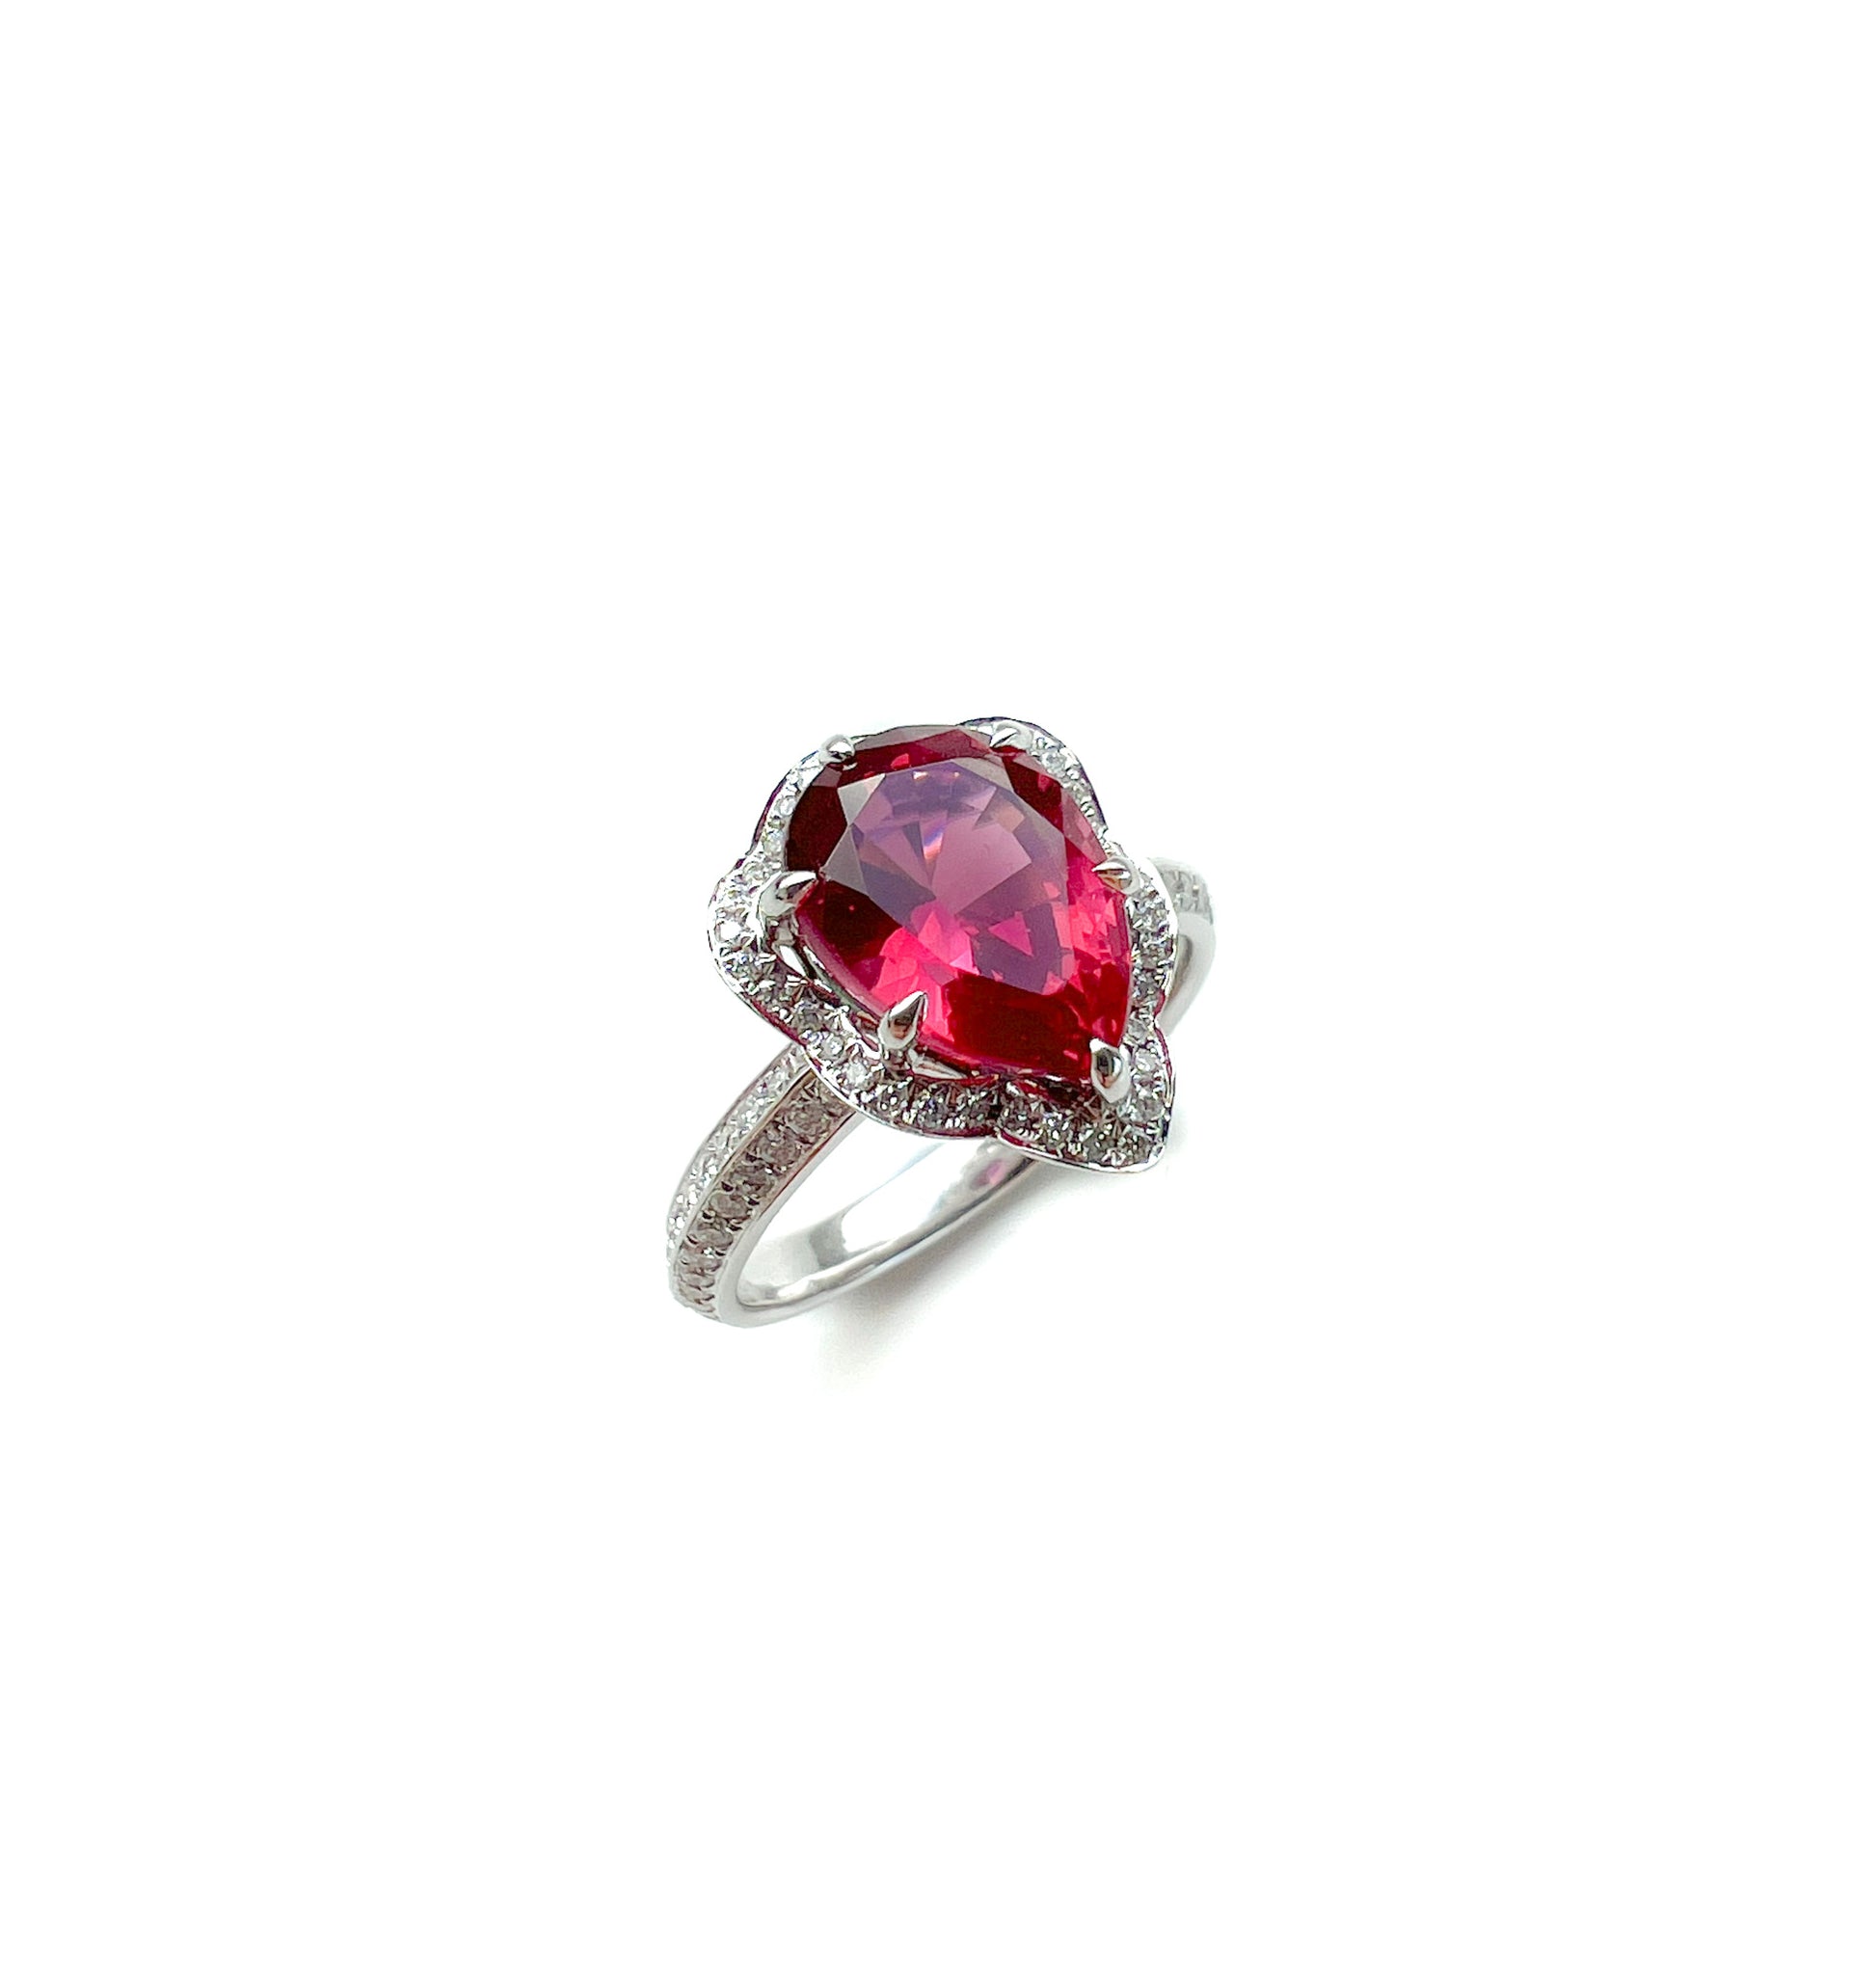 Red Spinel and diamond ring, GIA certified spinel and diamond ring. 红色尖晶石和钻石戒指 香港